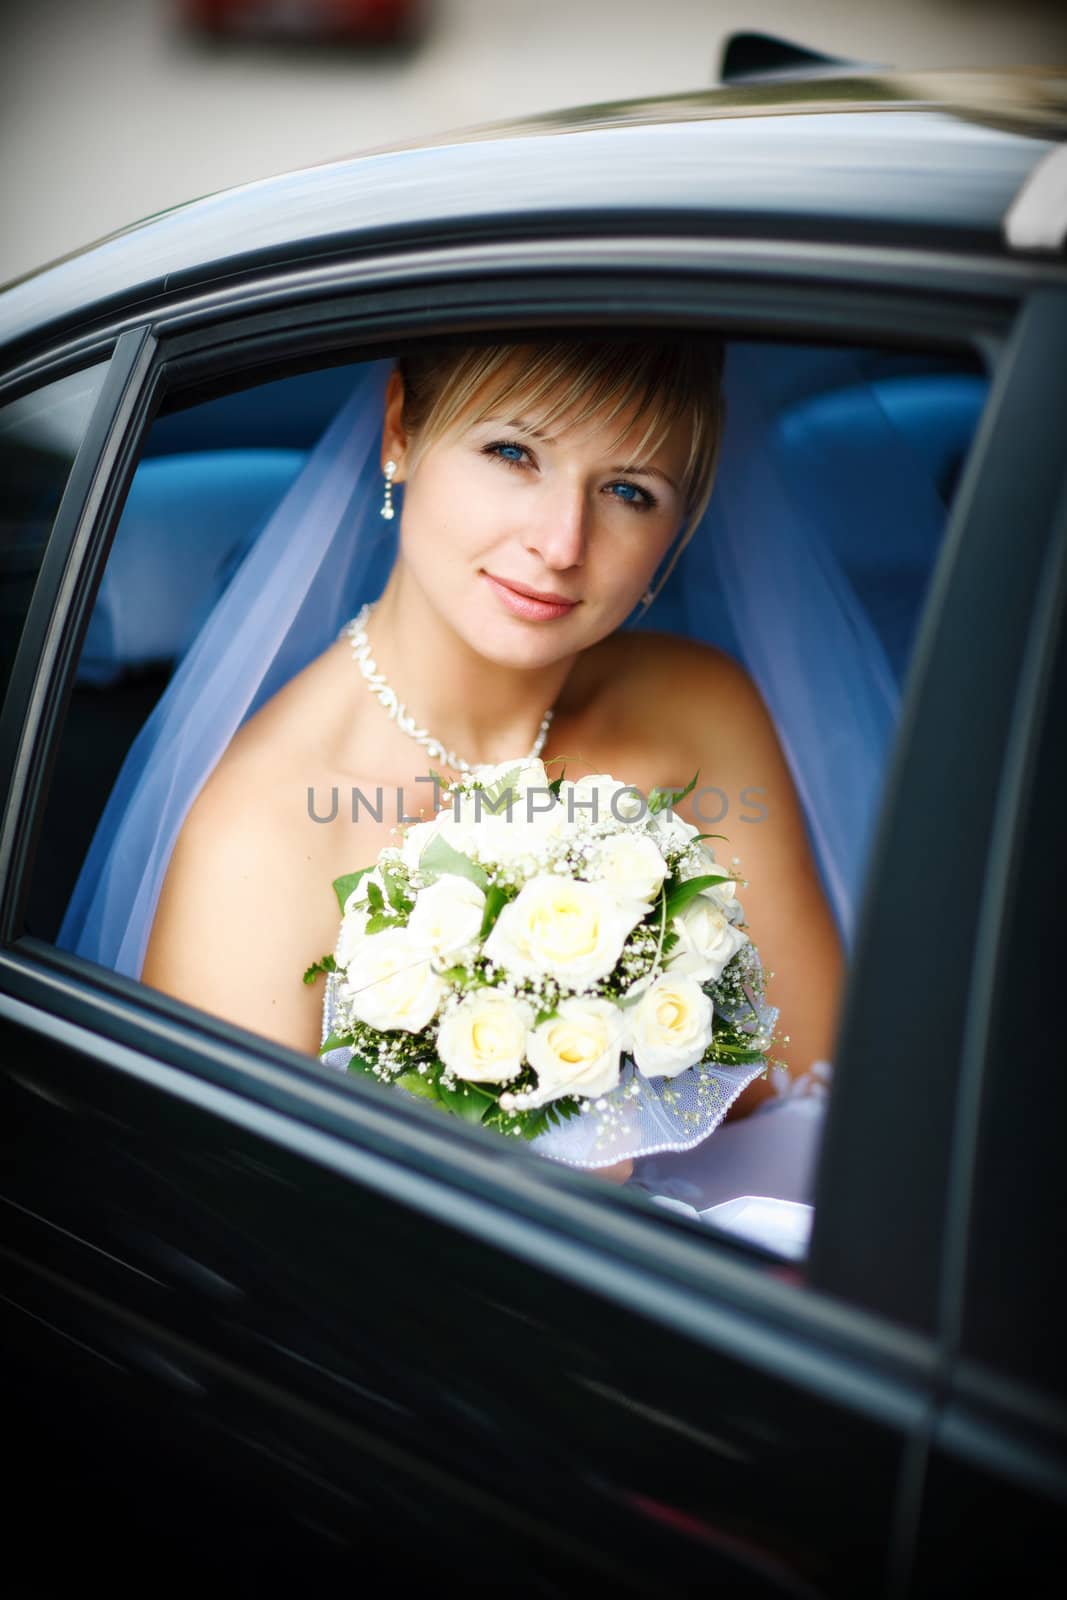 happy bride with flower bouquet siting in the car